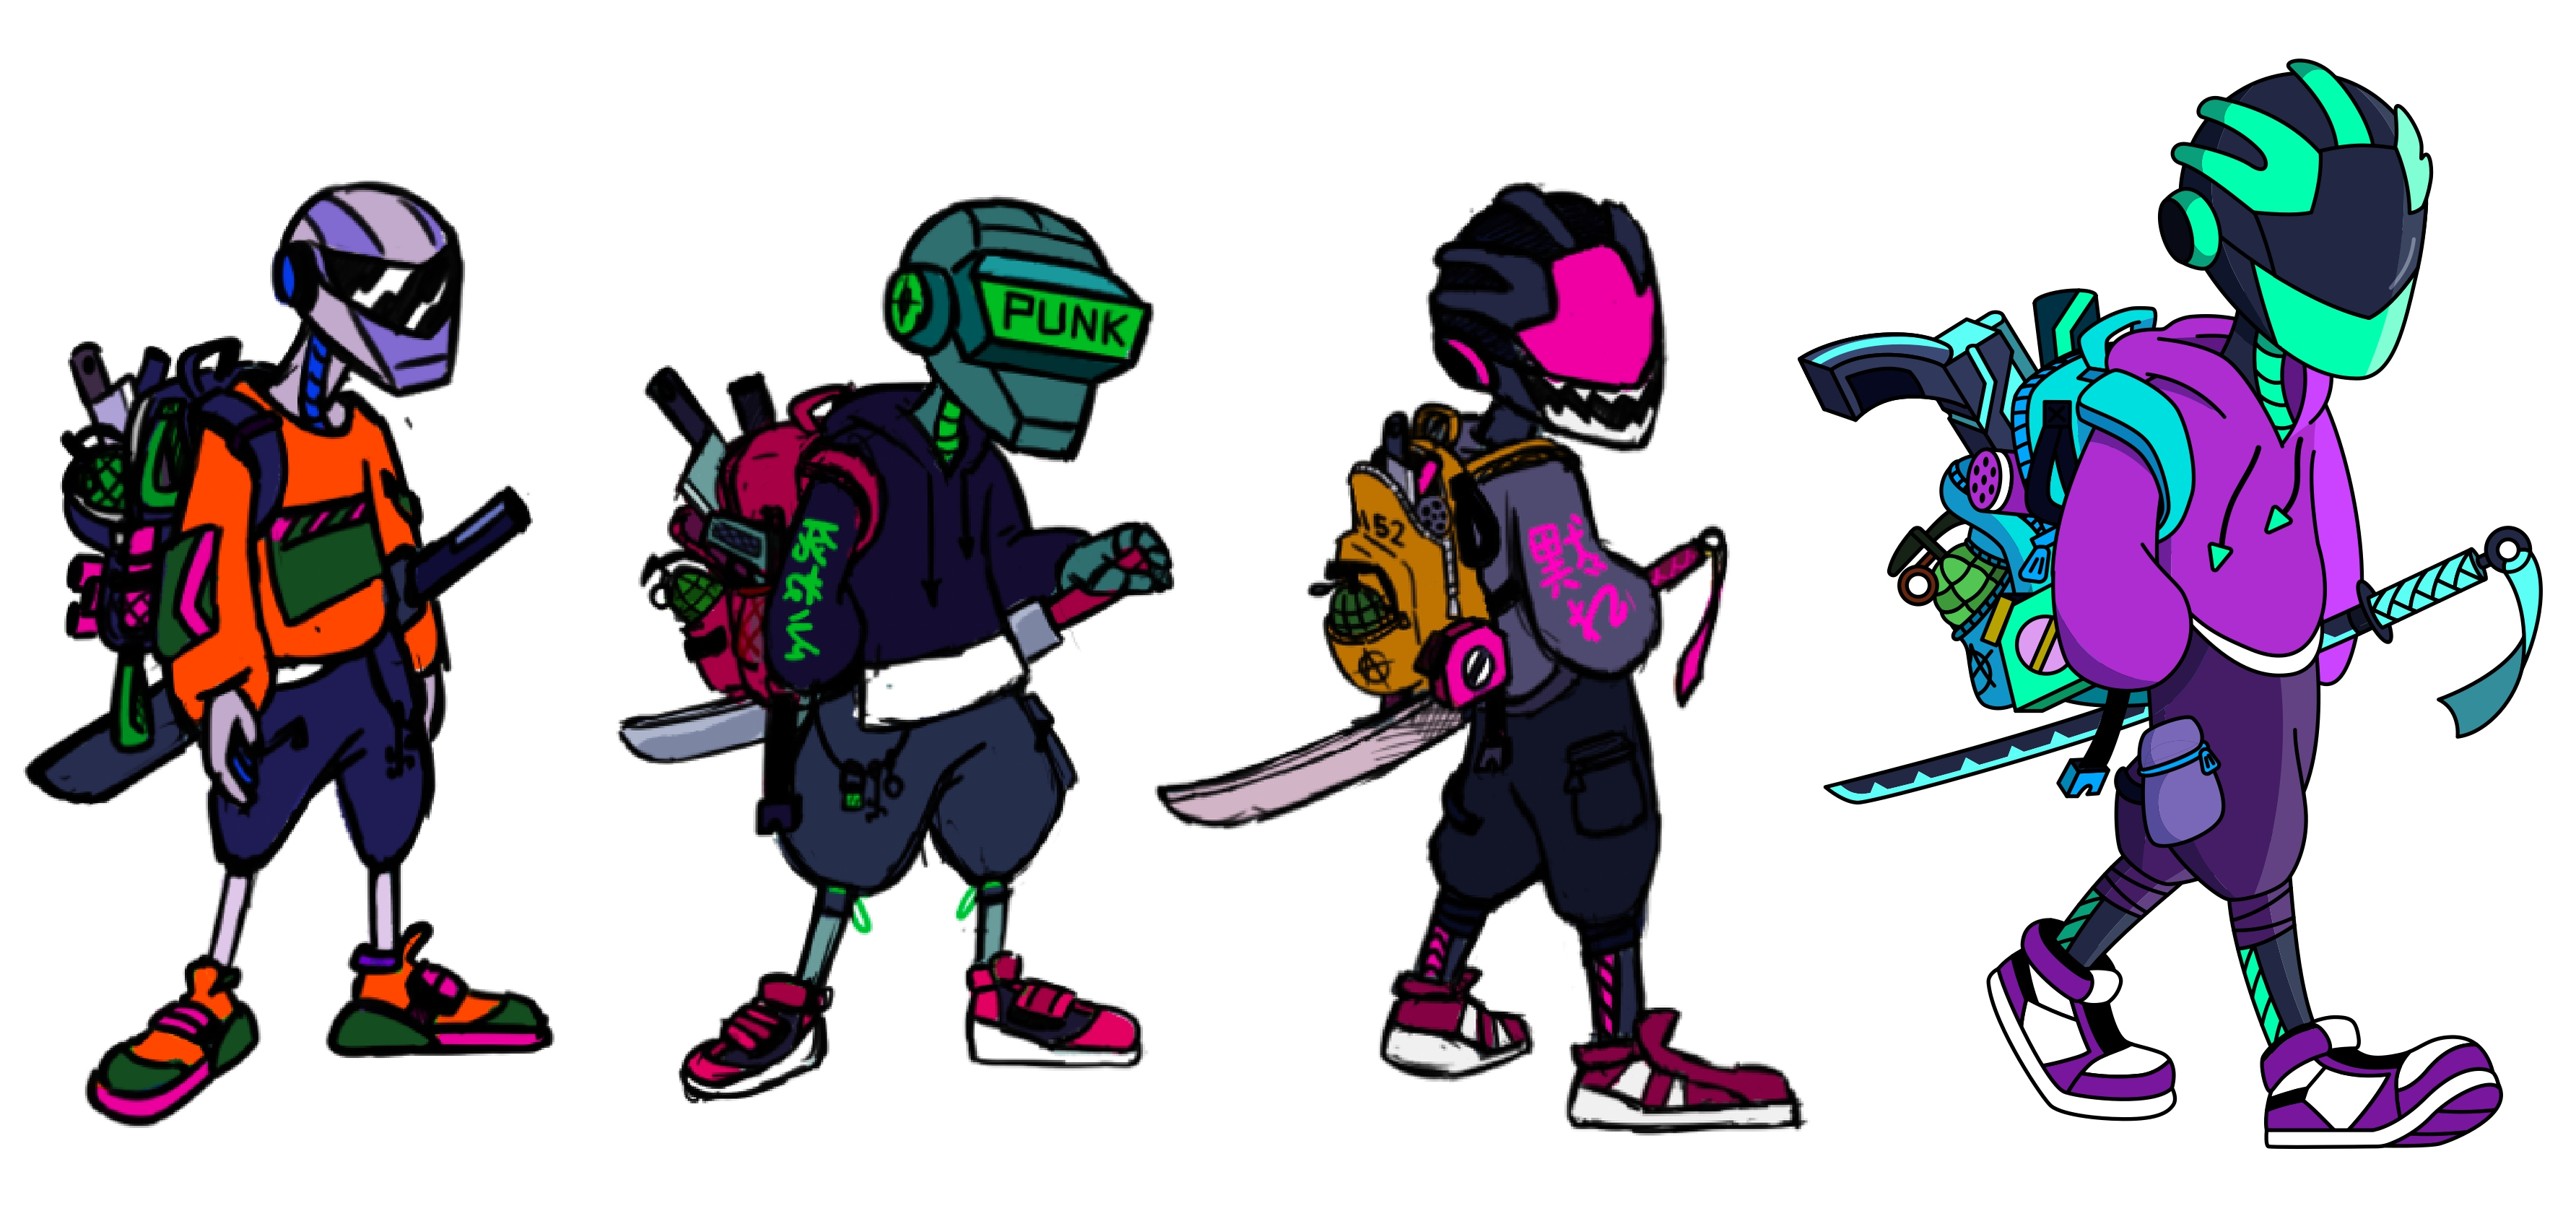 Character studies and final design for rebel robot